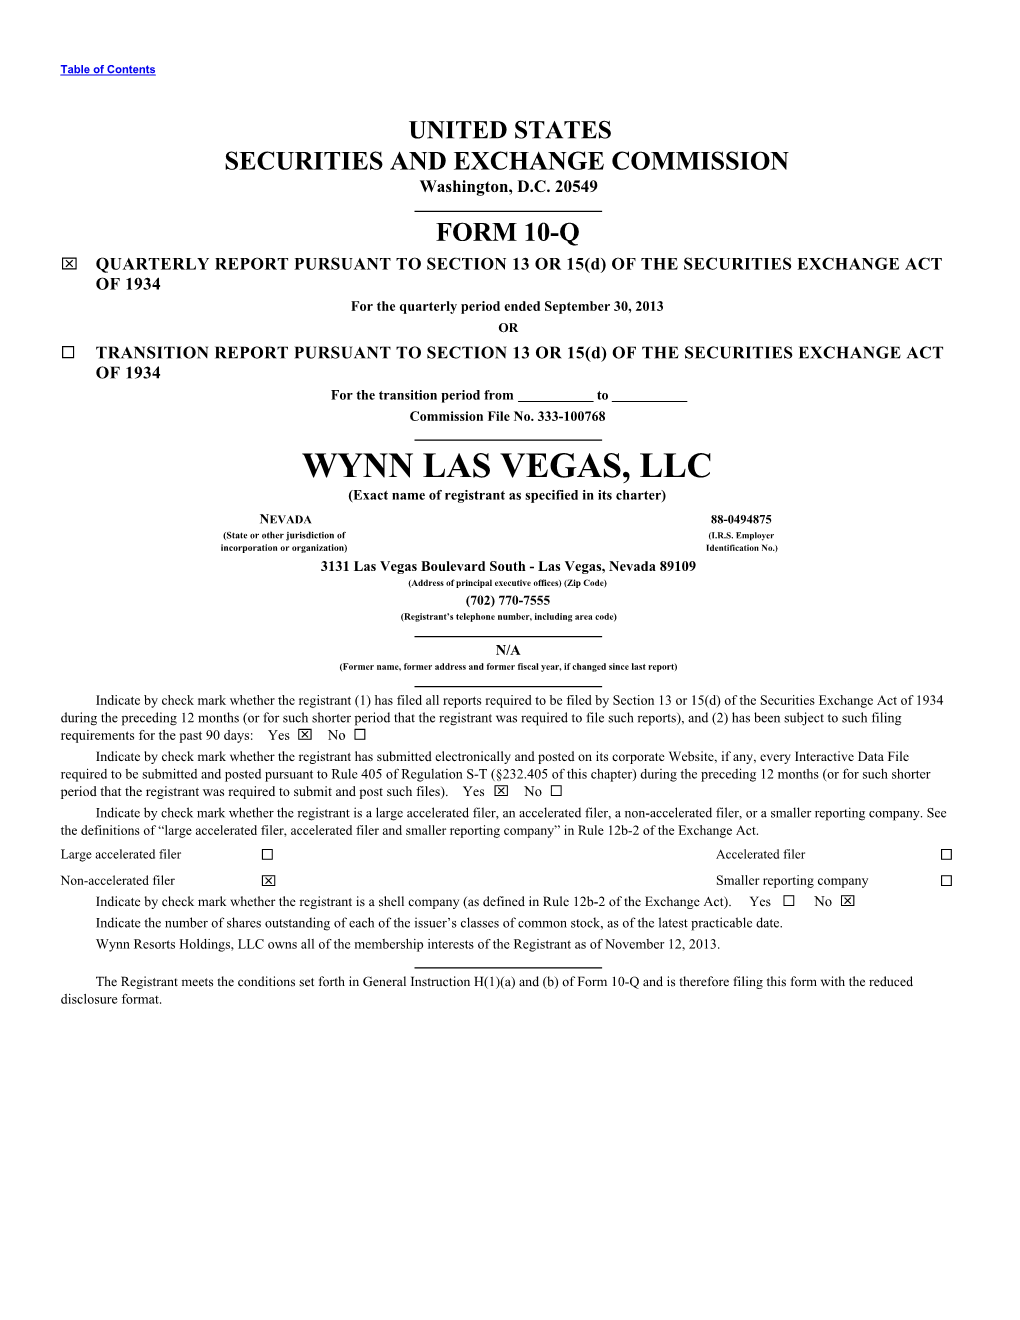 WYNN LAS VEGAS, LLC (Exact Name of Registrant As Specified in Its Charter)